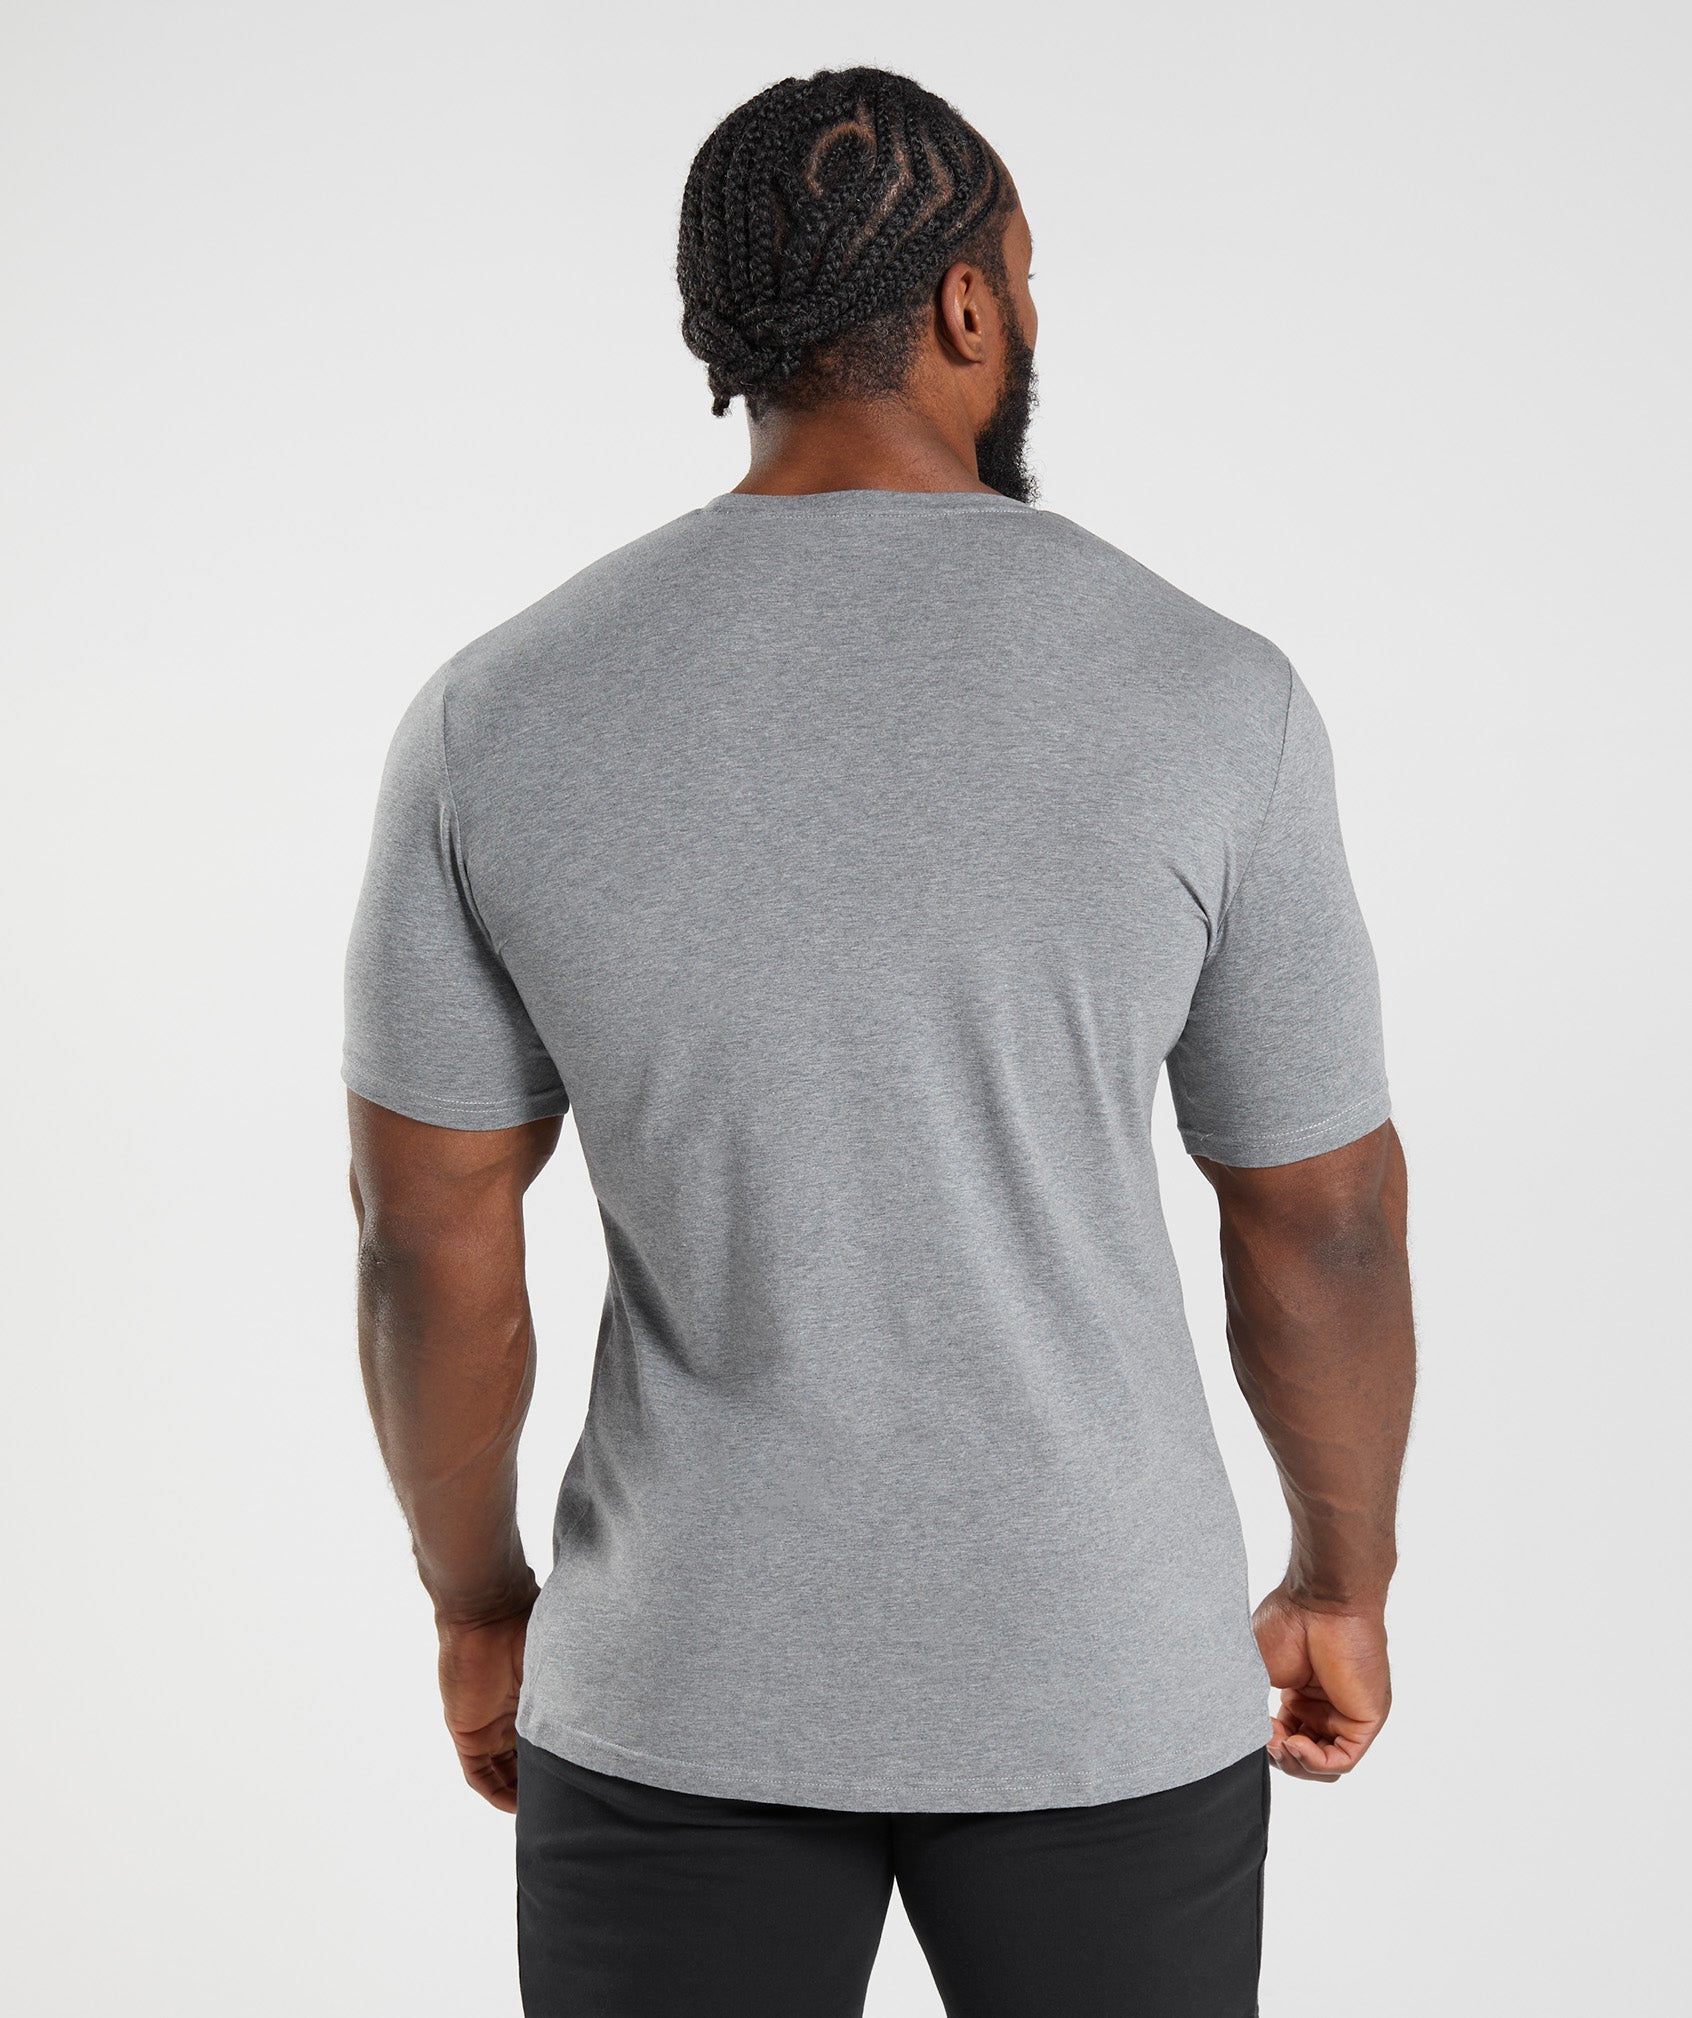 Essential T-Shirt in Charcoal Grey Marl - view 2